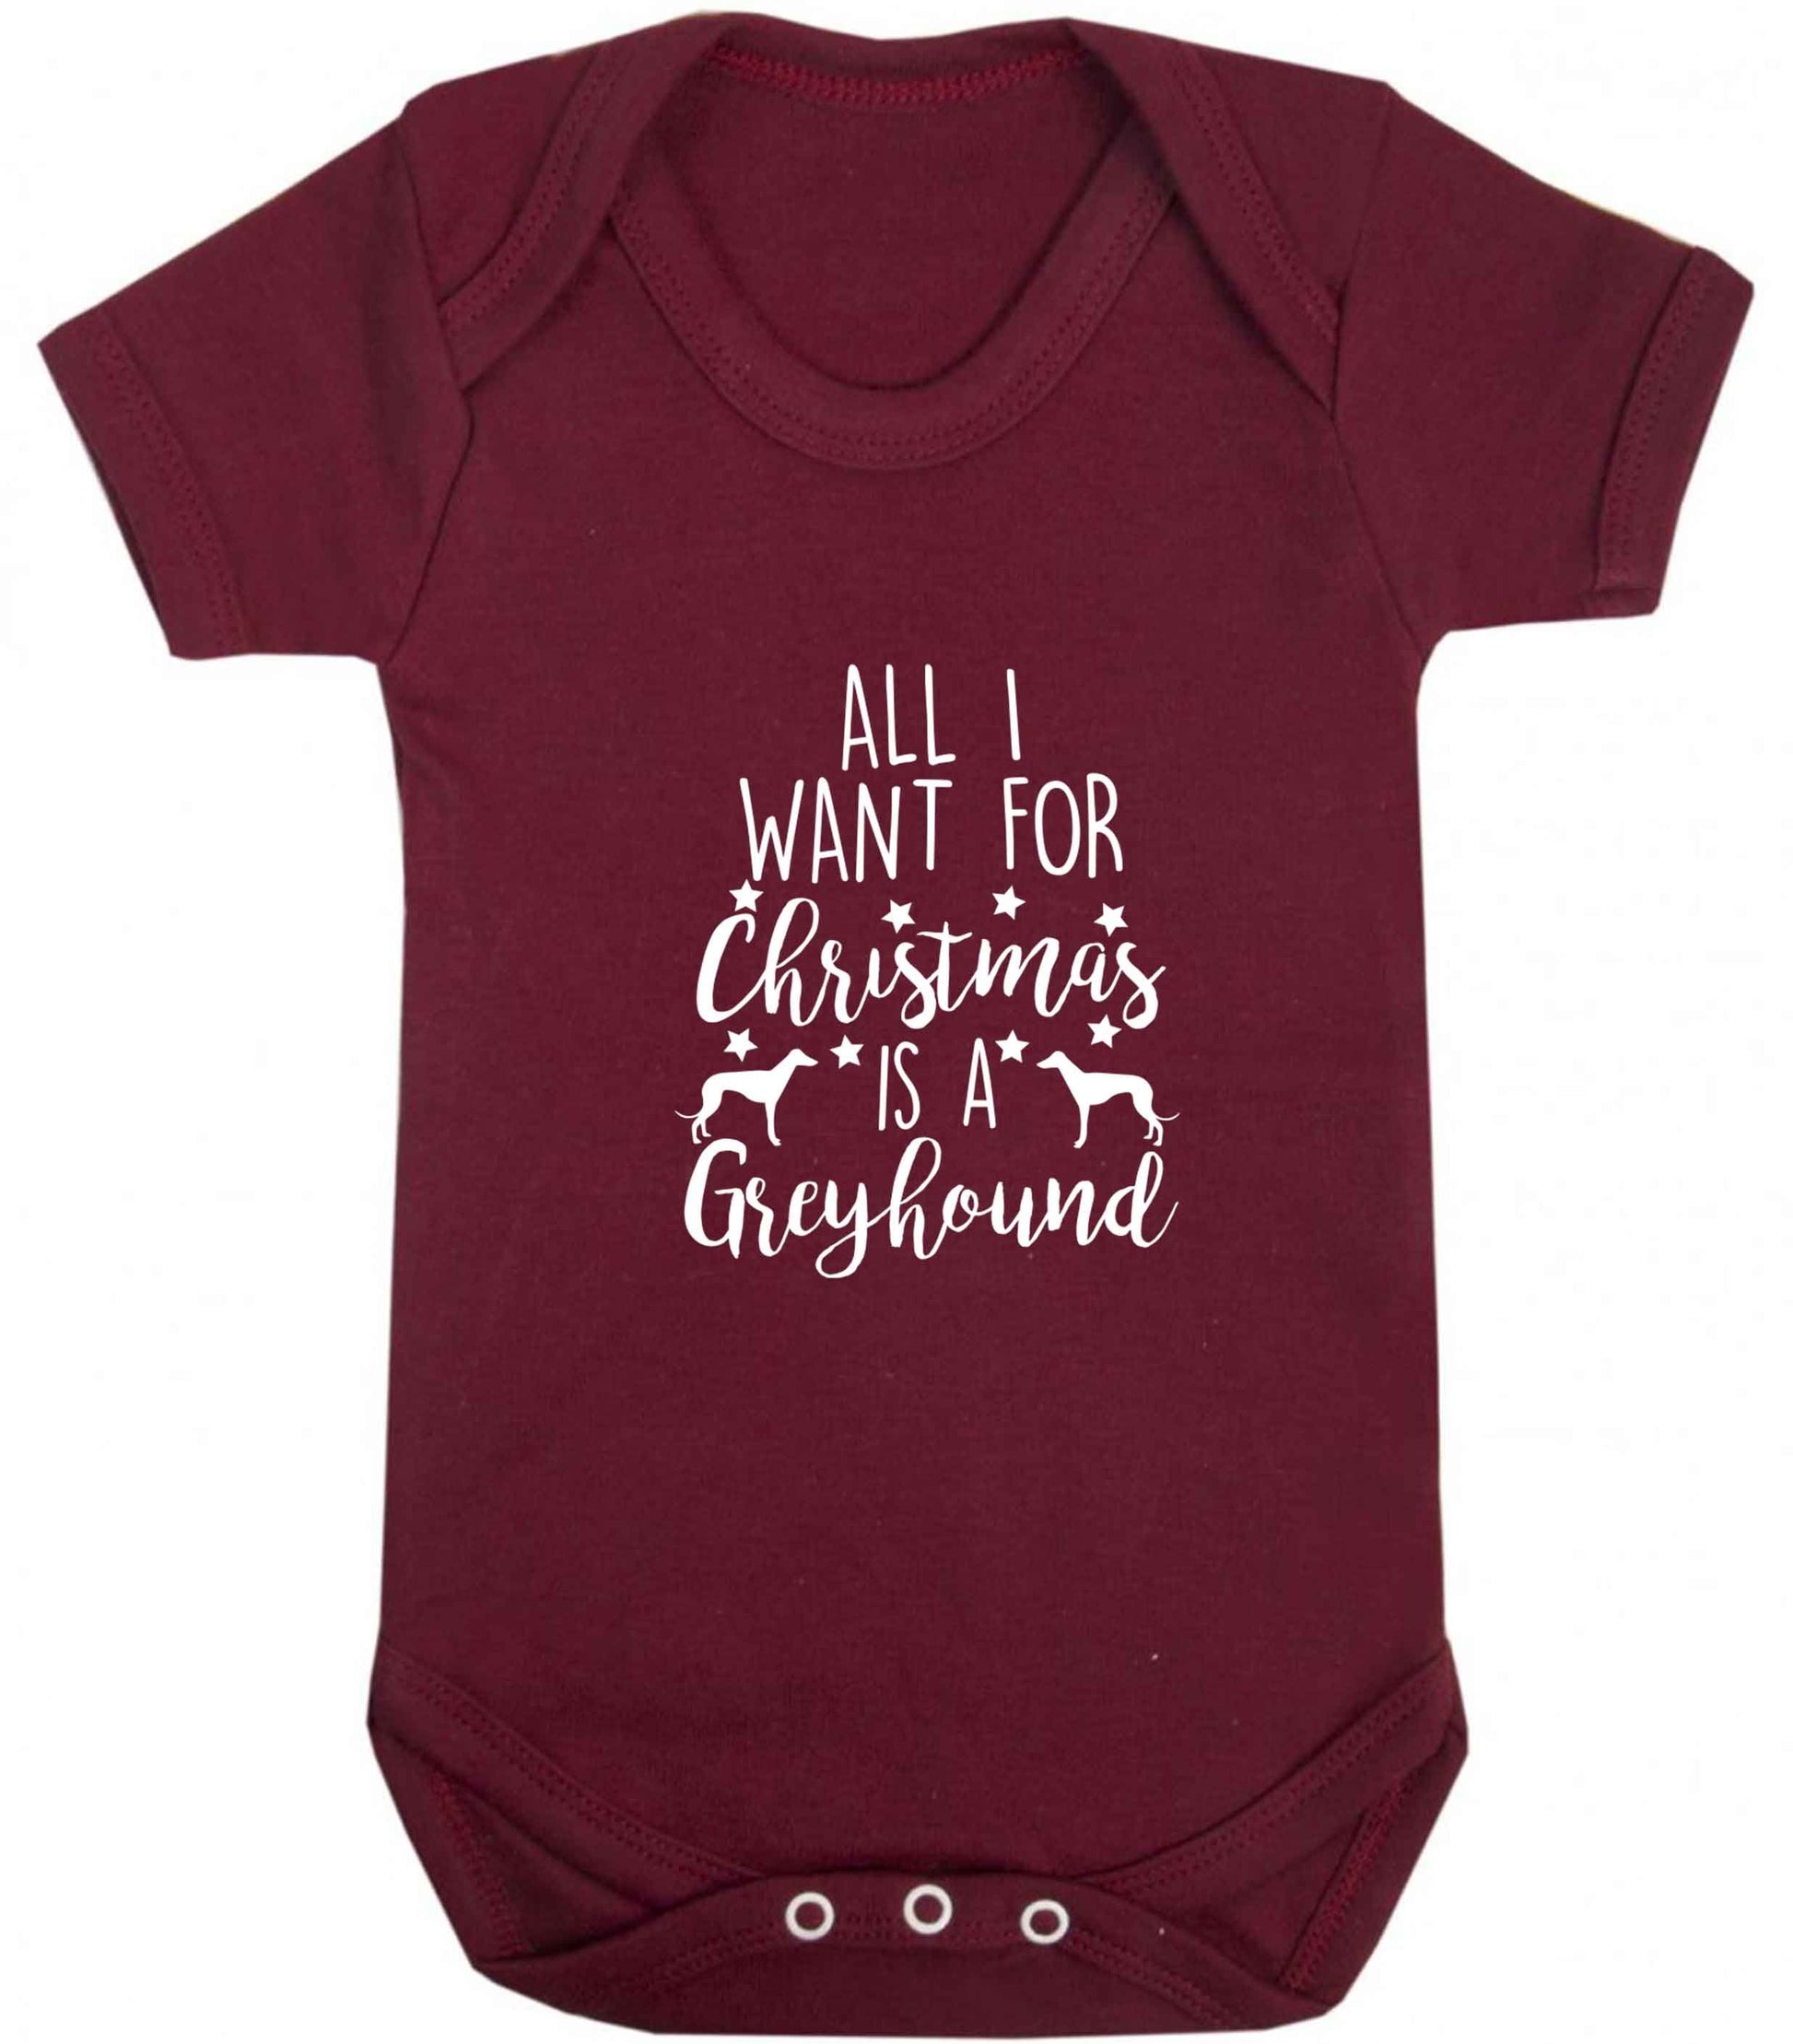 All I want for Christmas is a greyhound baby vest maroon 18-24 months